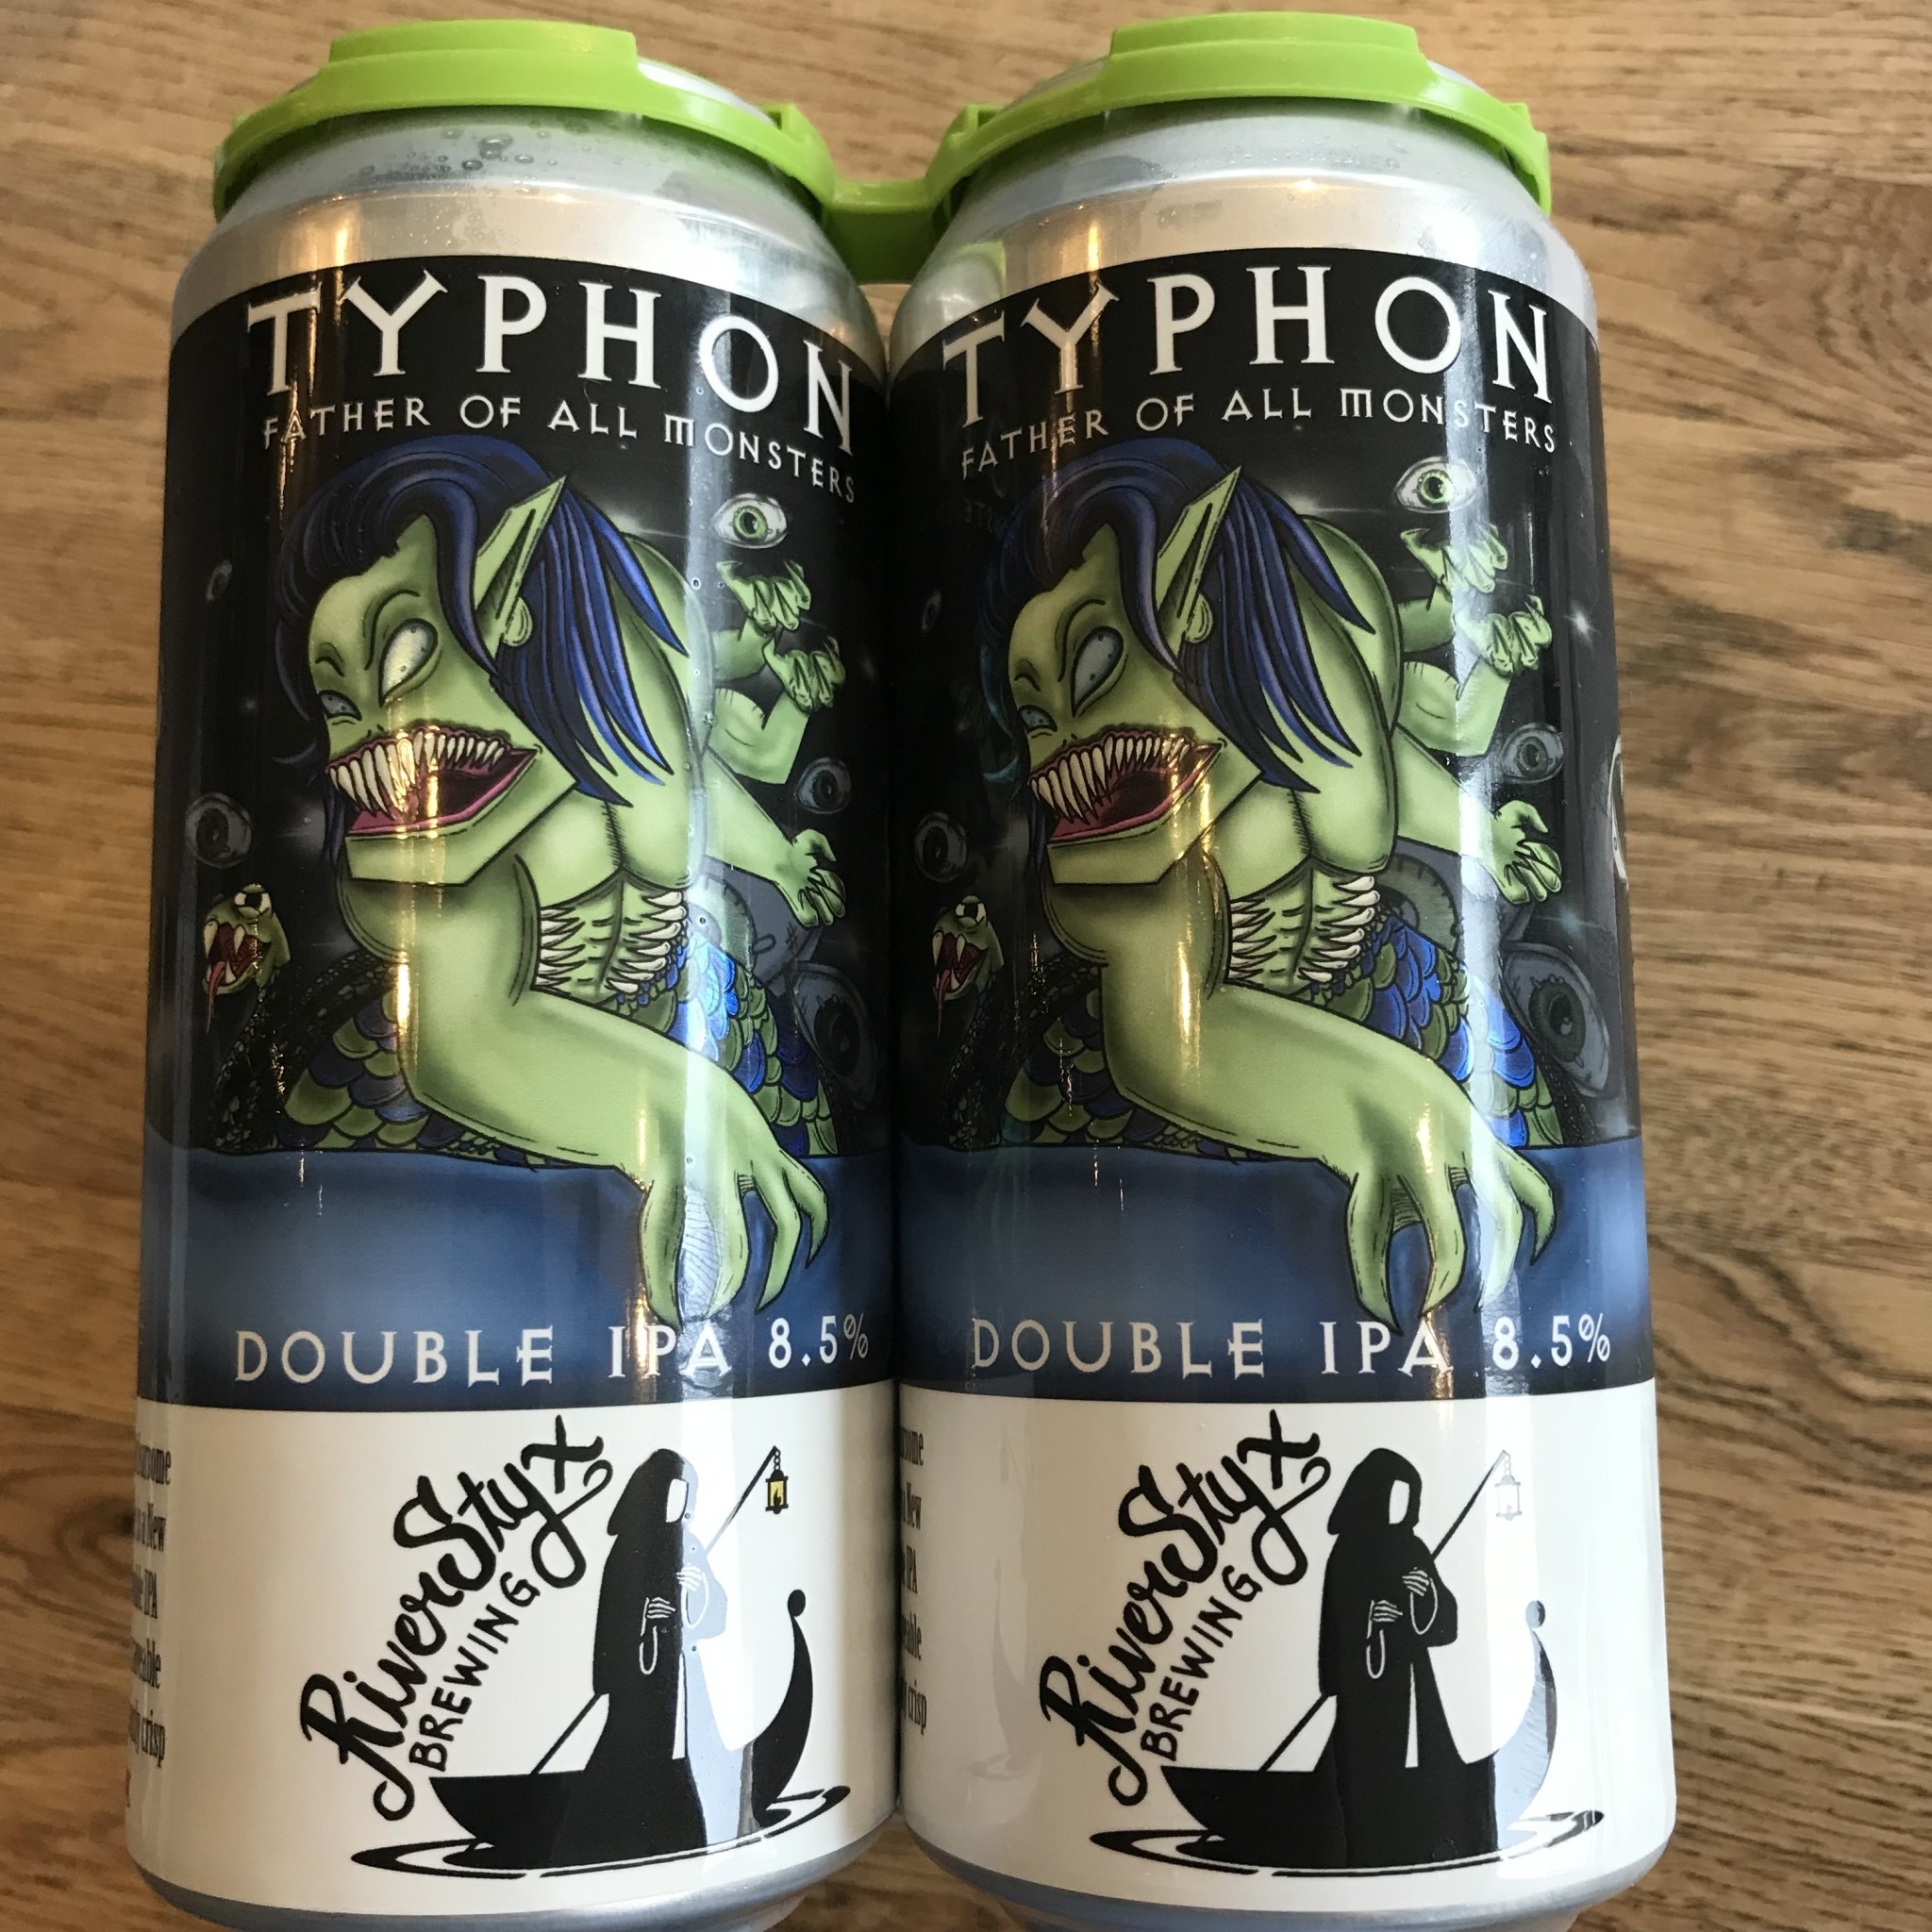 USA River Styx Typhon Father Of All Monsters DIPA 4pk